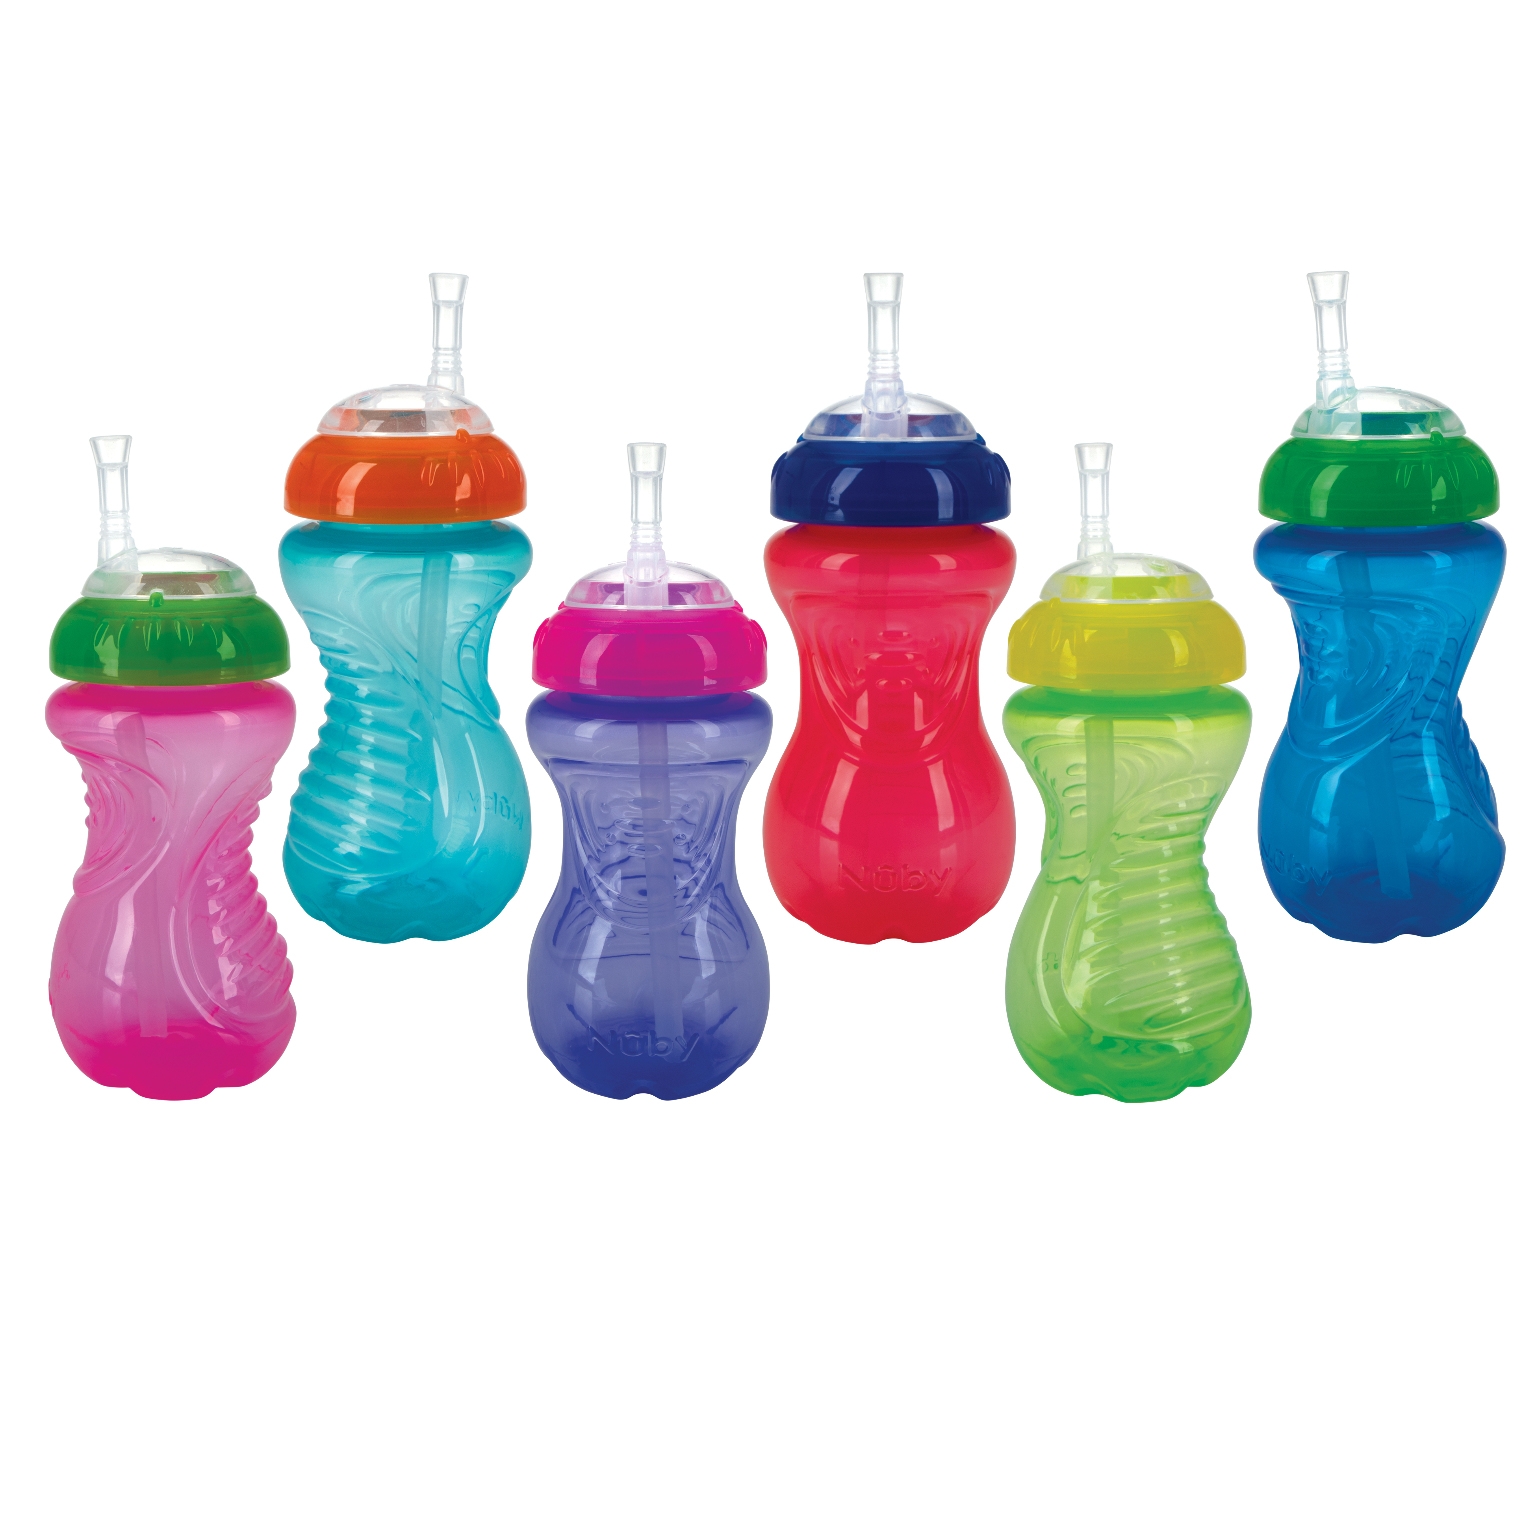 Nuby No-Spill Cups - Flexi Straw, Colors Vary